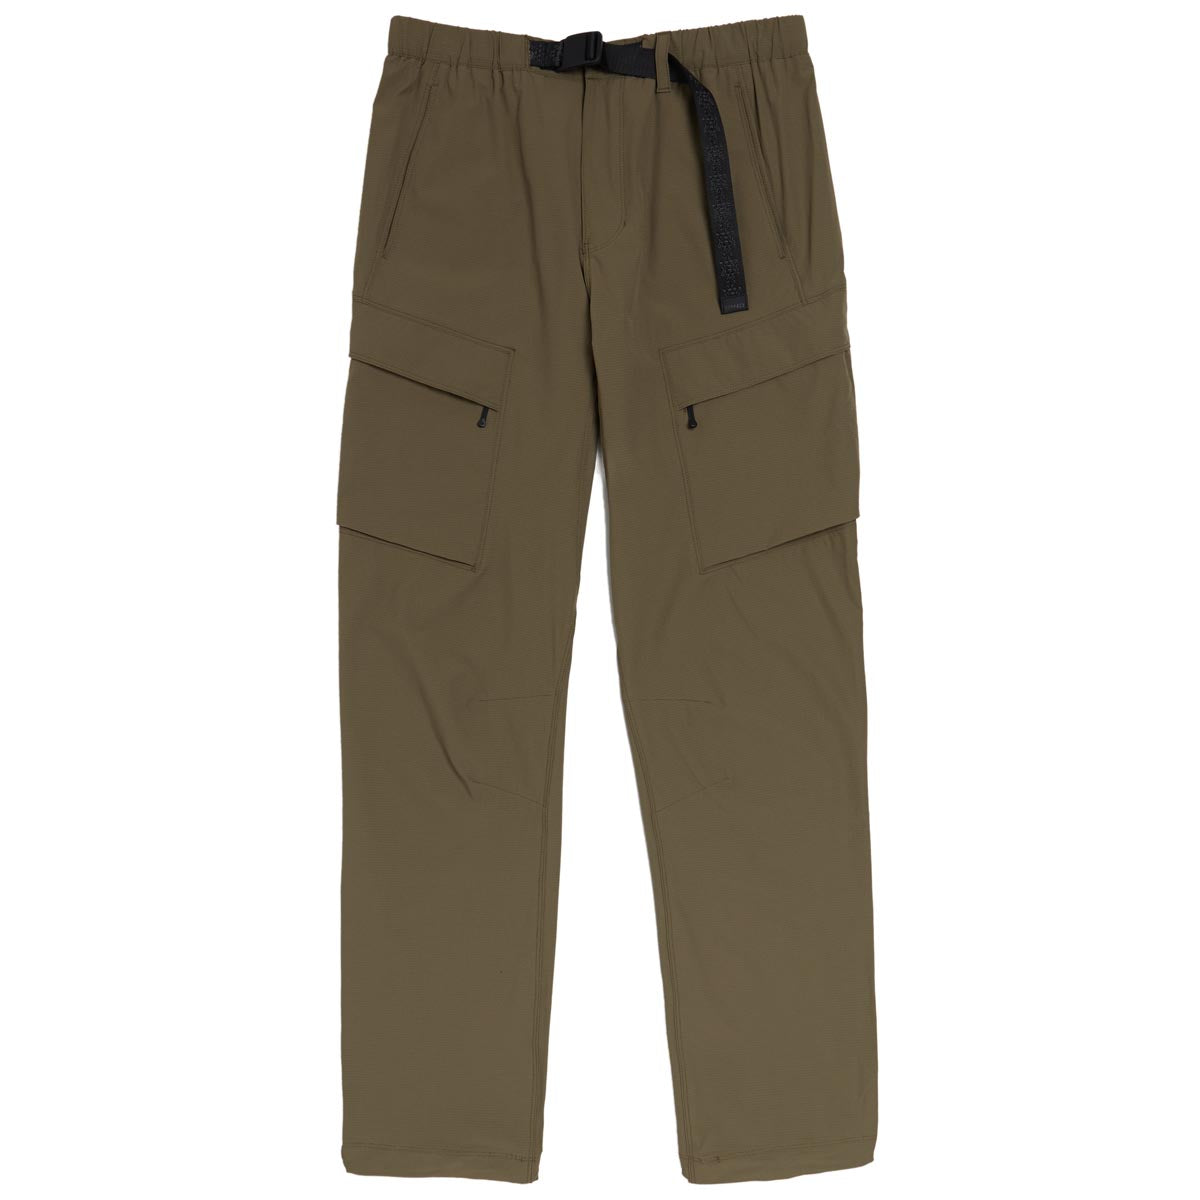 Kennedy The Ascension Cargo Pants - Wet Sand image 1